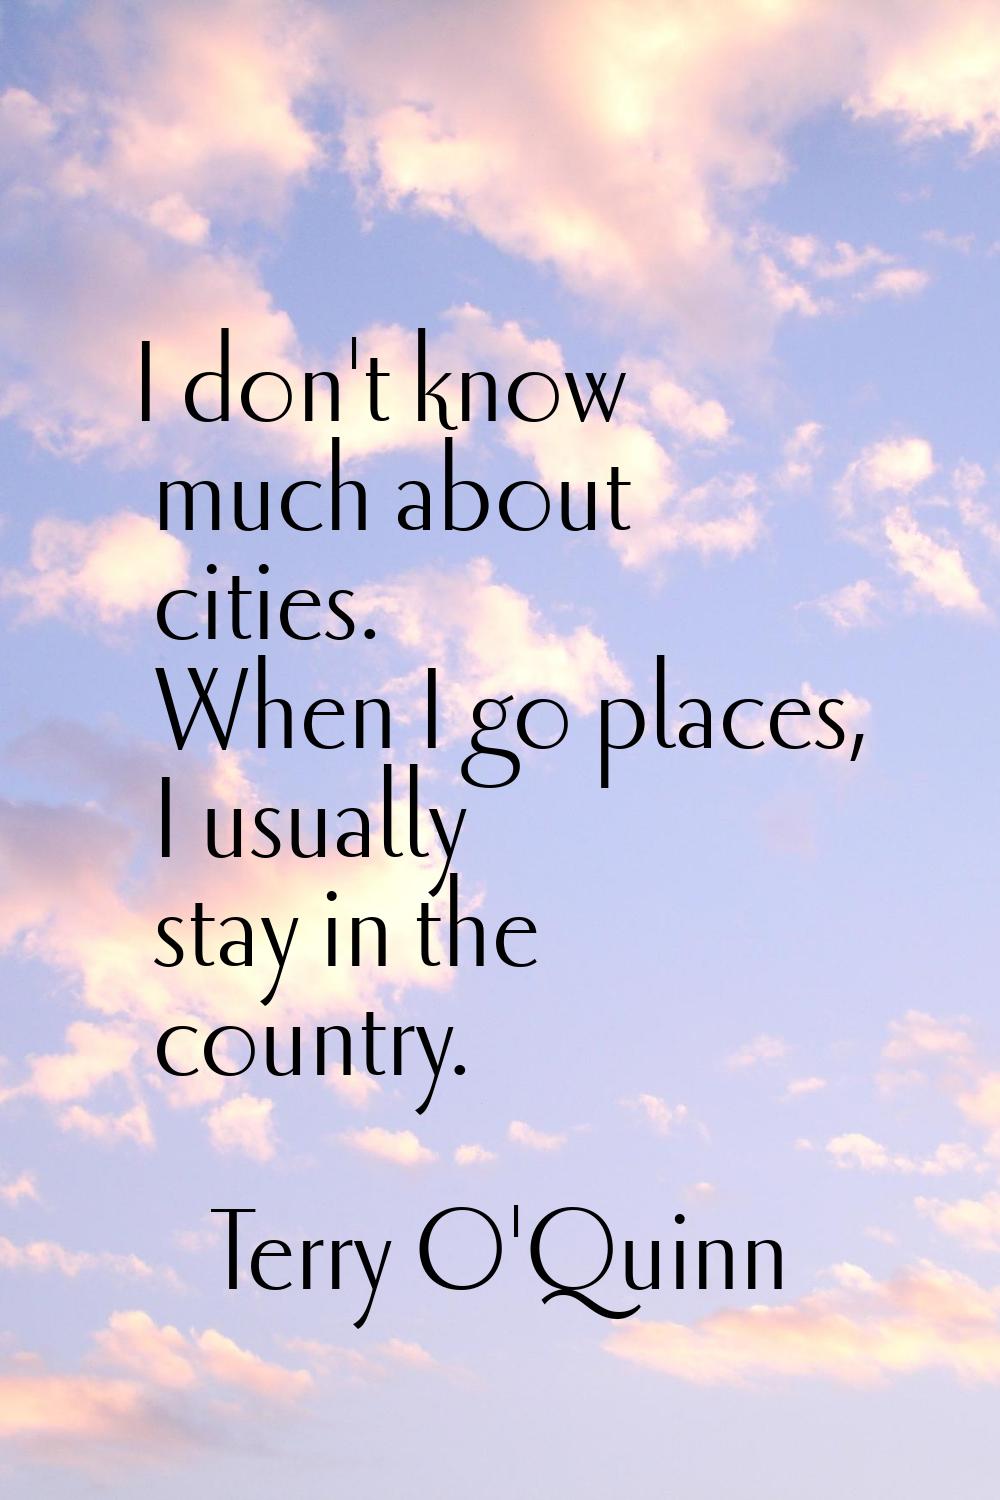 I don't know much about cities. When I go places, I usually stay in the country.